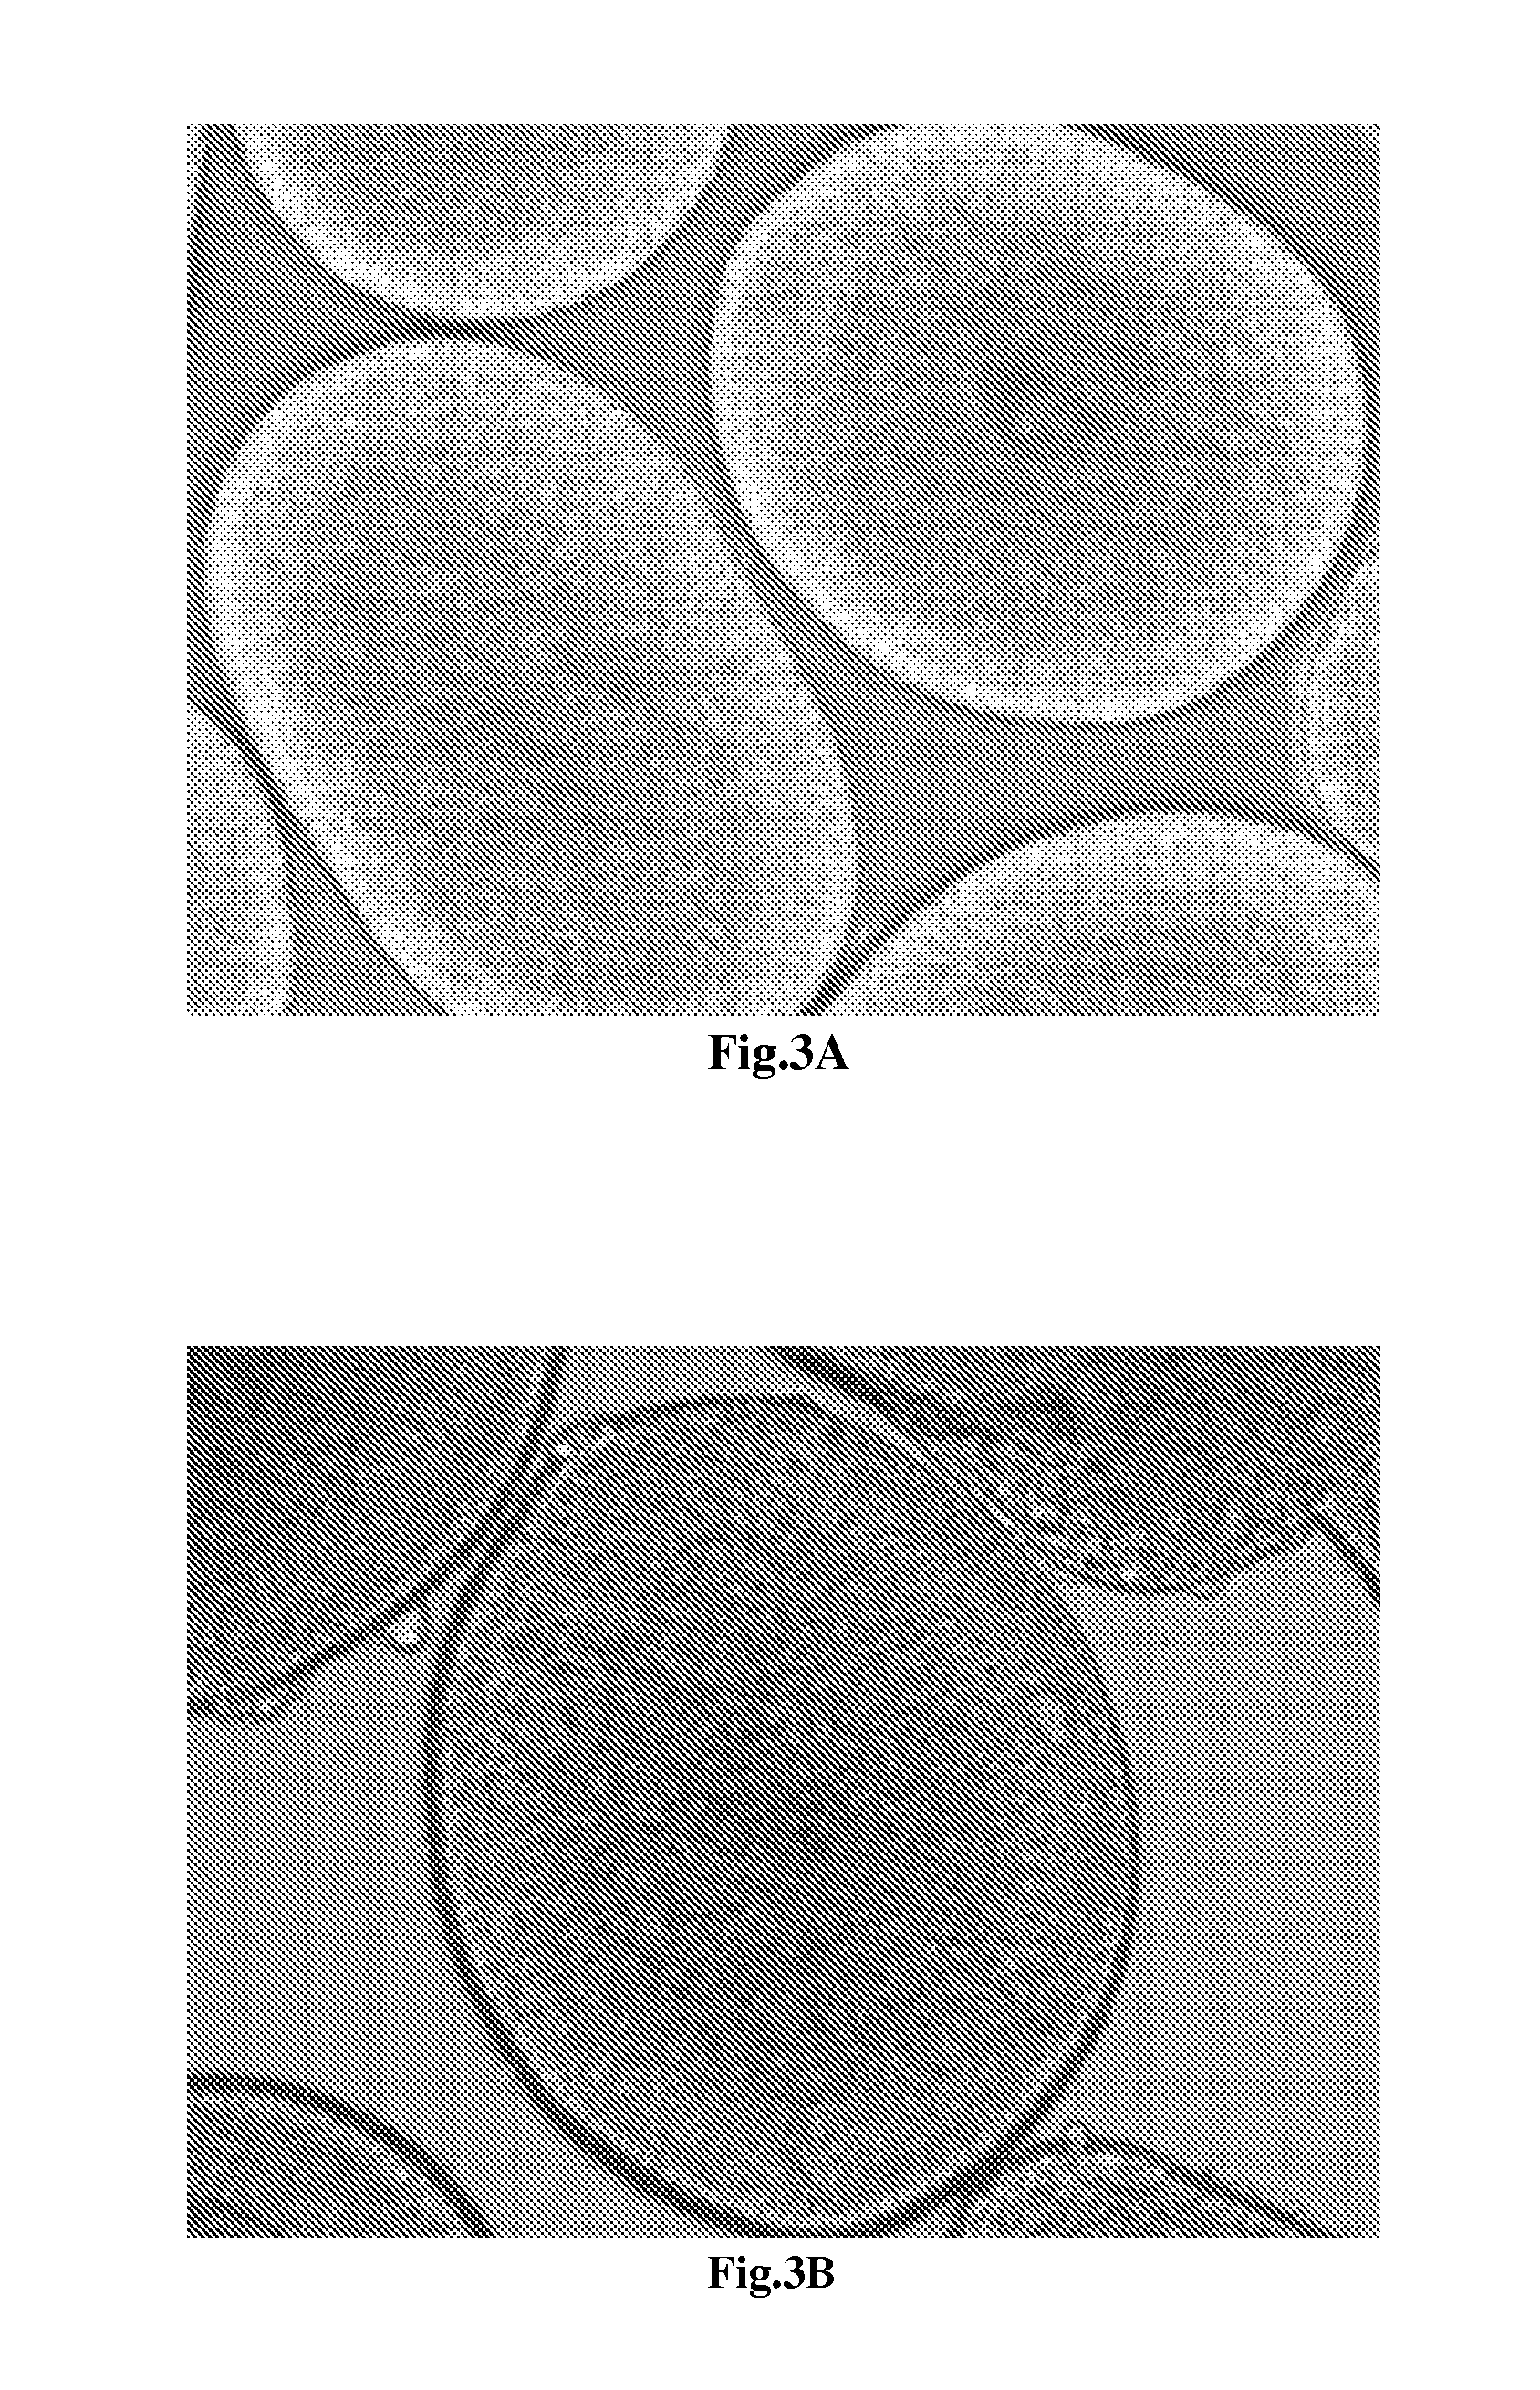 Method for neuroepithelial cells differentiation from pluripotent stem cells and medium using same